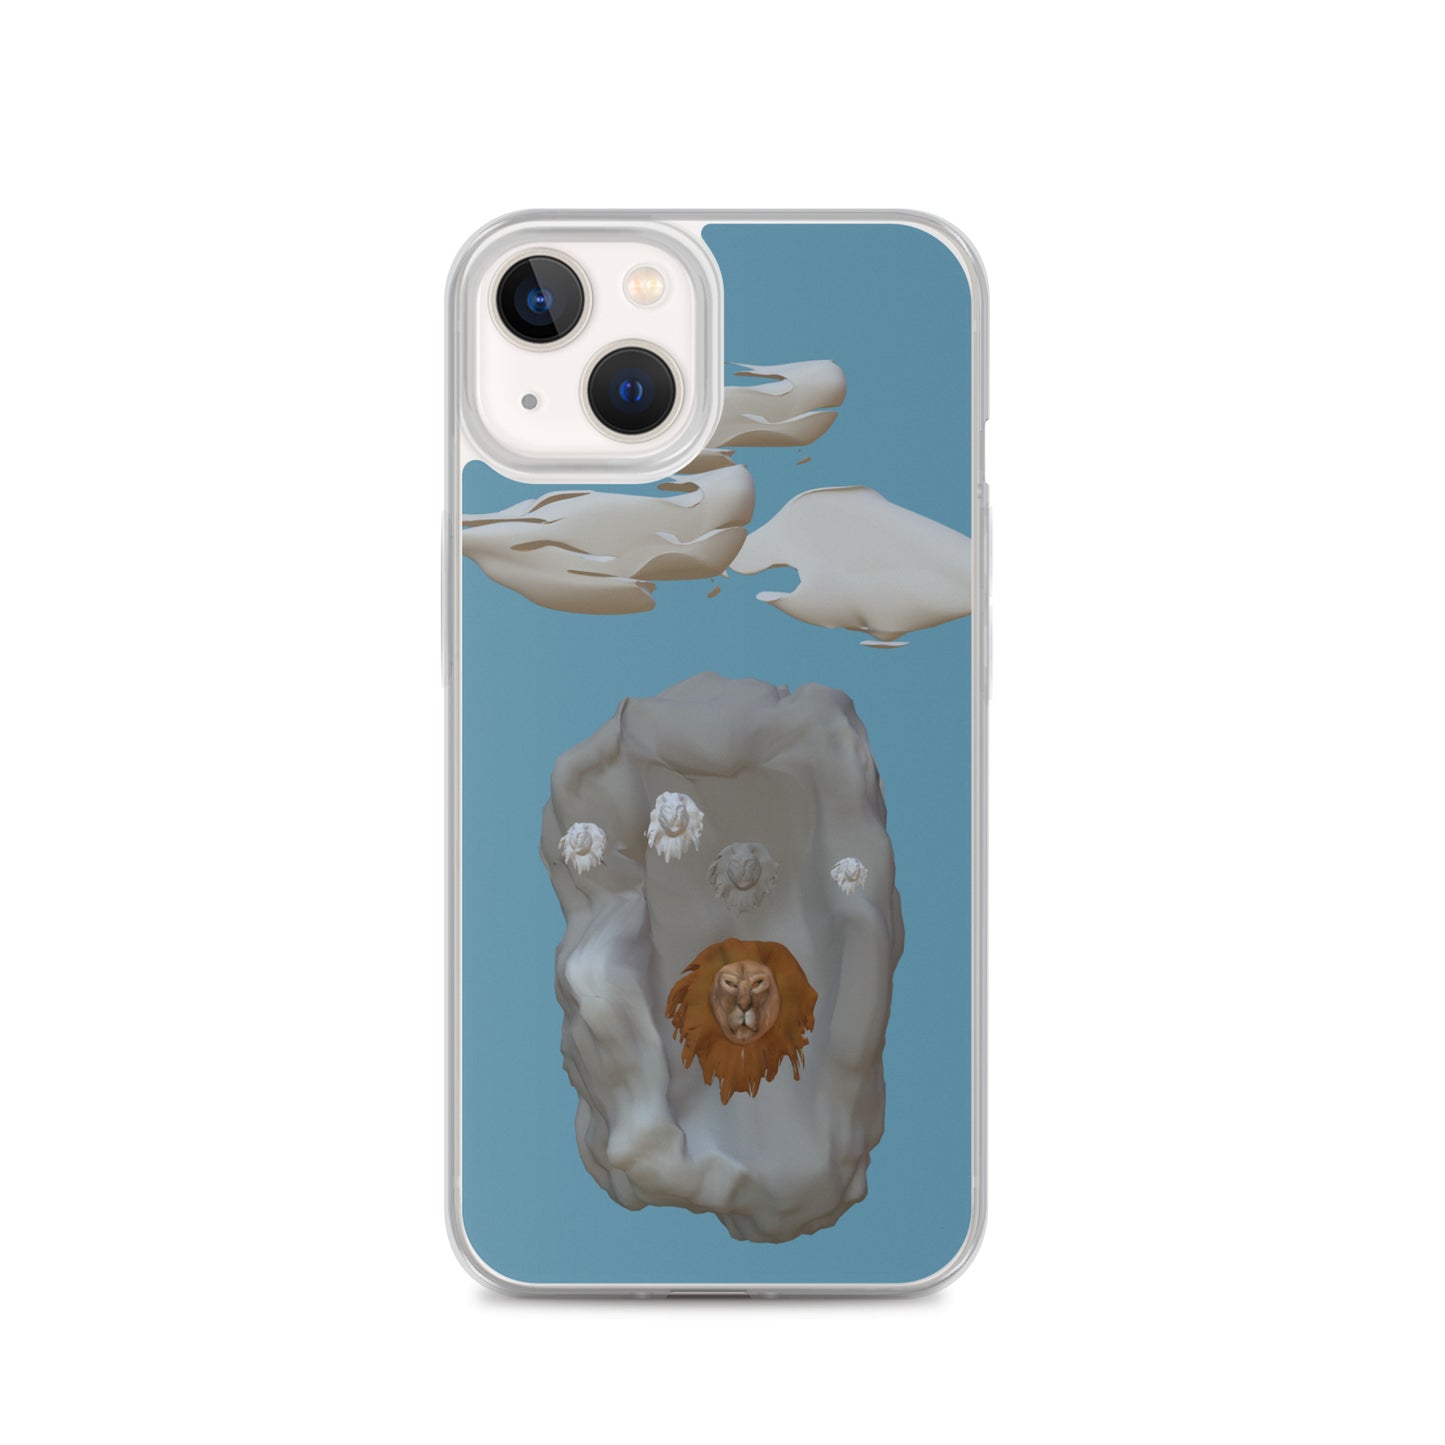 iPhone Case - Lion in the Rock